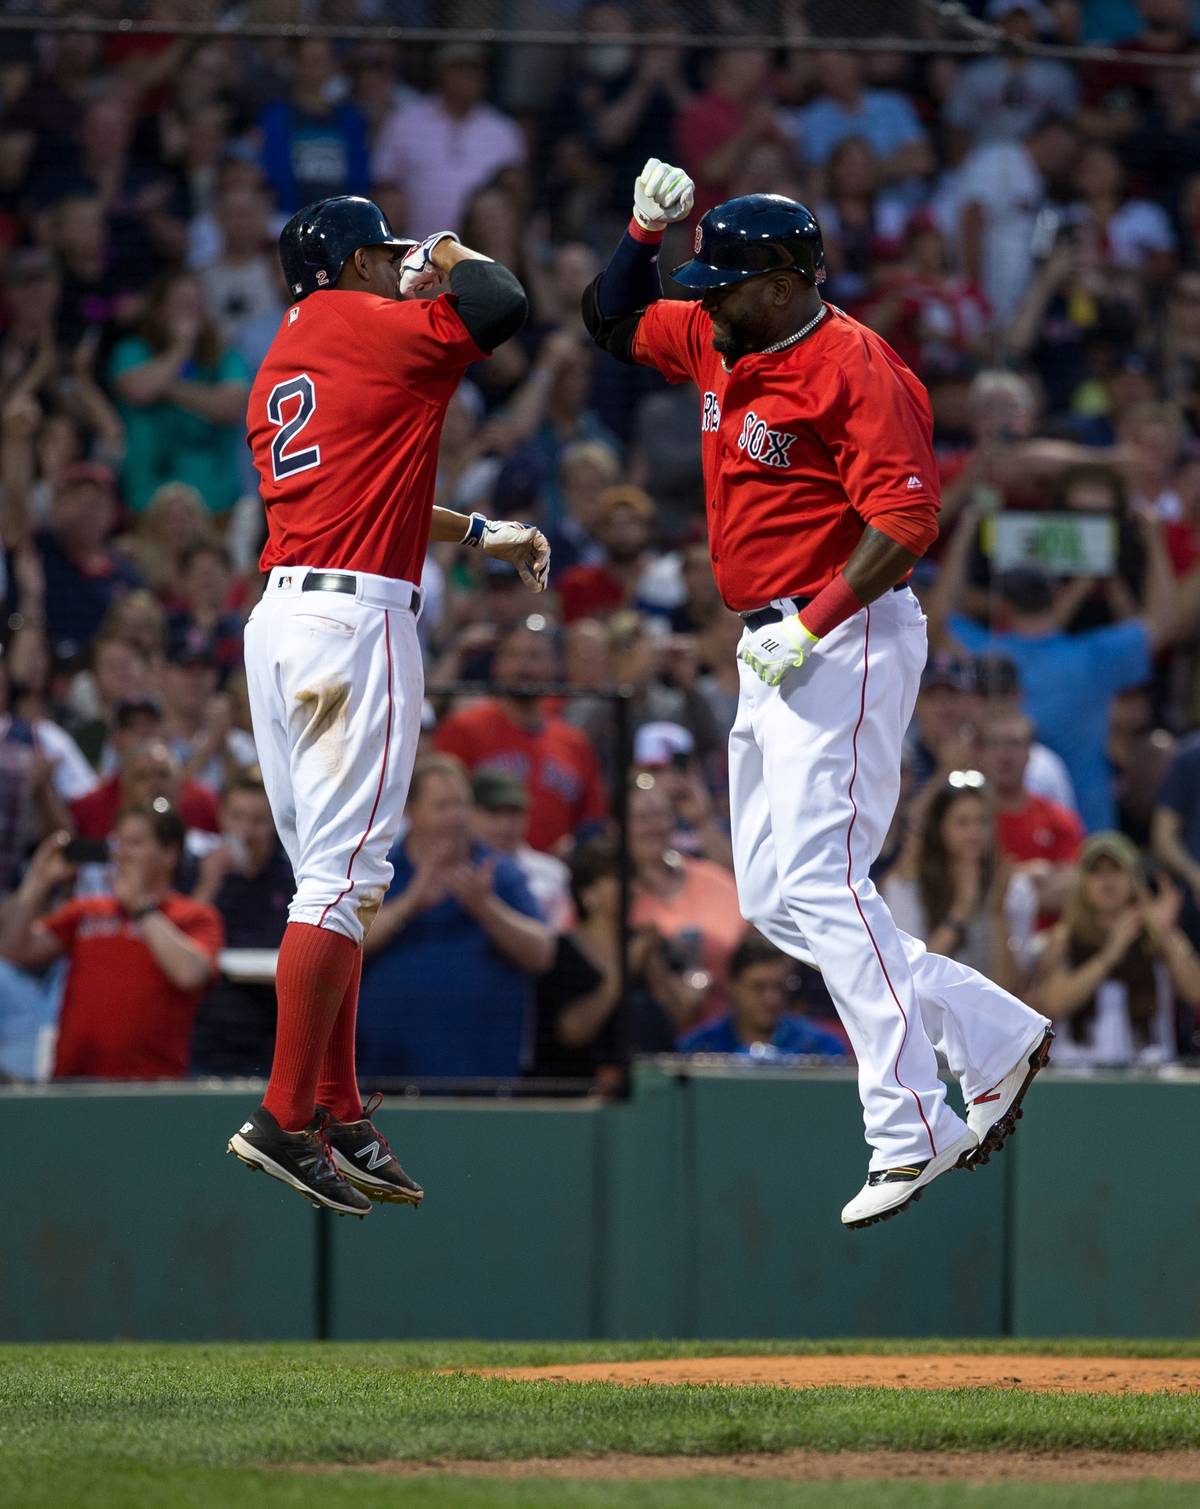 David Ortiz celebrates with Xander Bogaerts after he hit a two-run home run against the Seattle Mariners at Fenway Park, June 17, 2016. (Rich Gagnon/Getty Images)